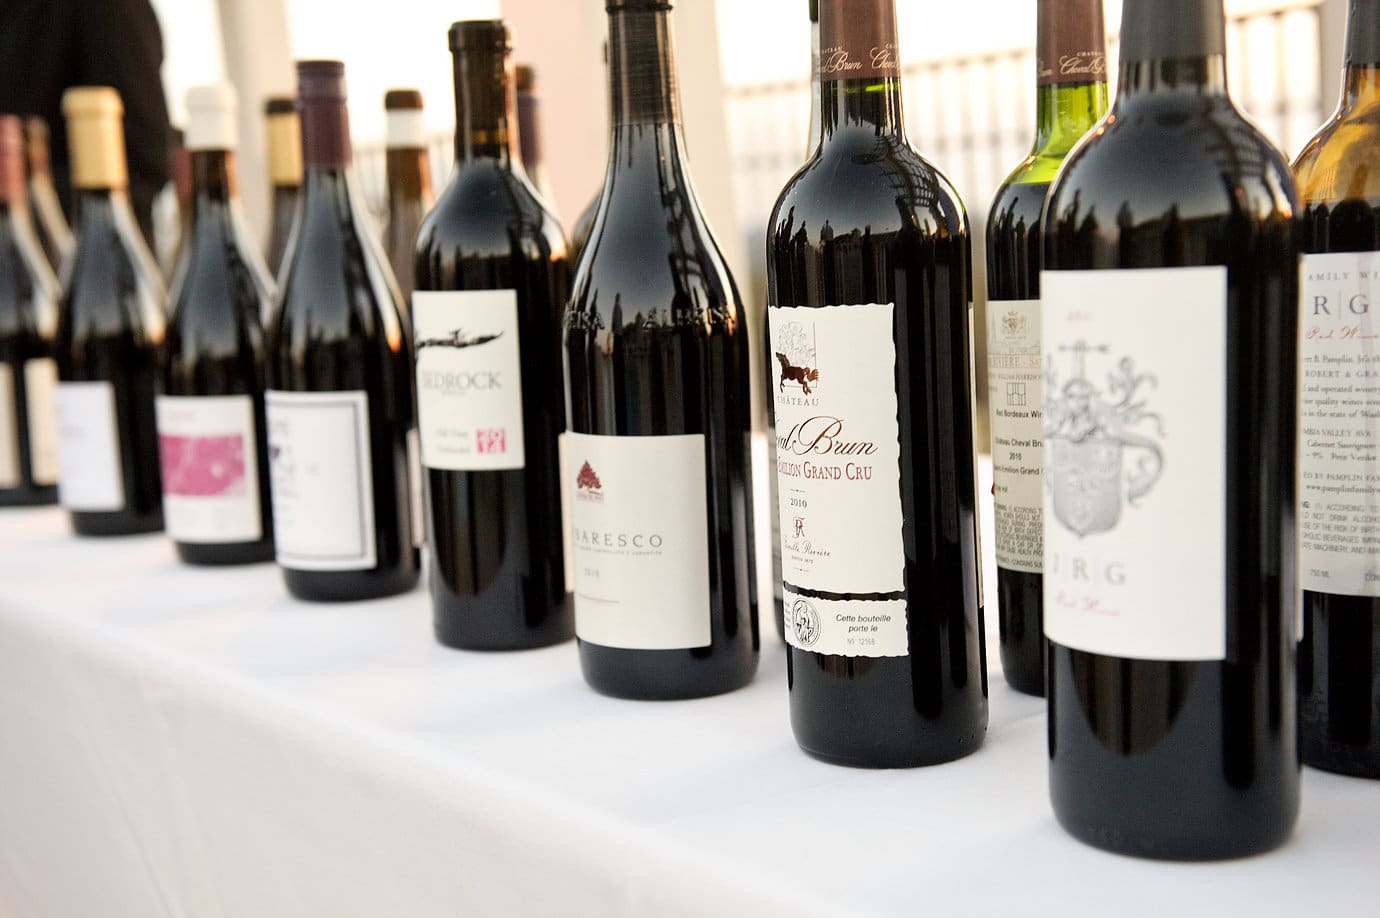 5348c5 b220b3c08c174fba9f6e3ac1d5578186 Piggly Wiggly's wine showcase to benefit The Daniel Project - October 3rd